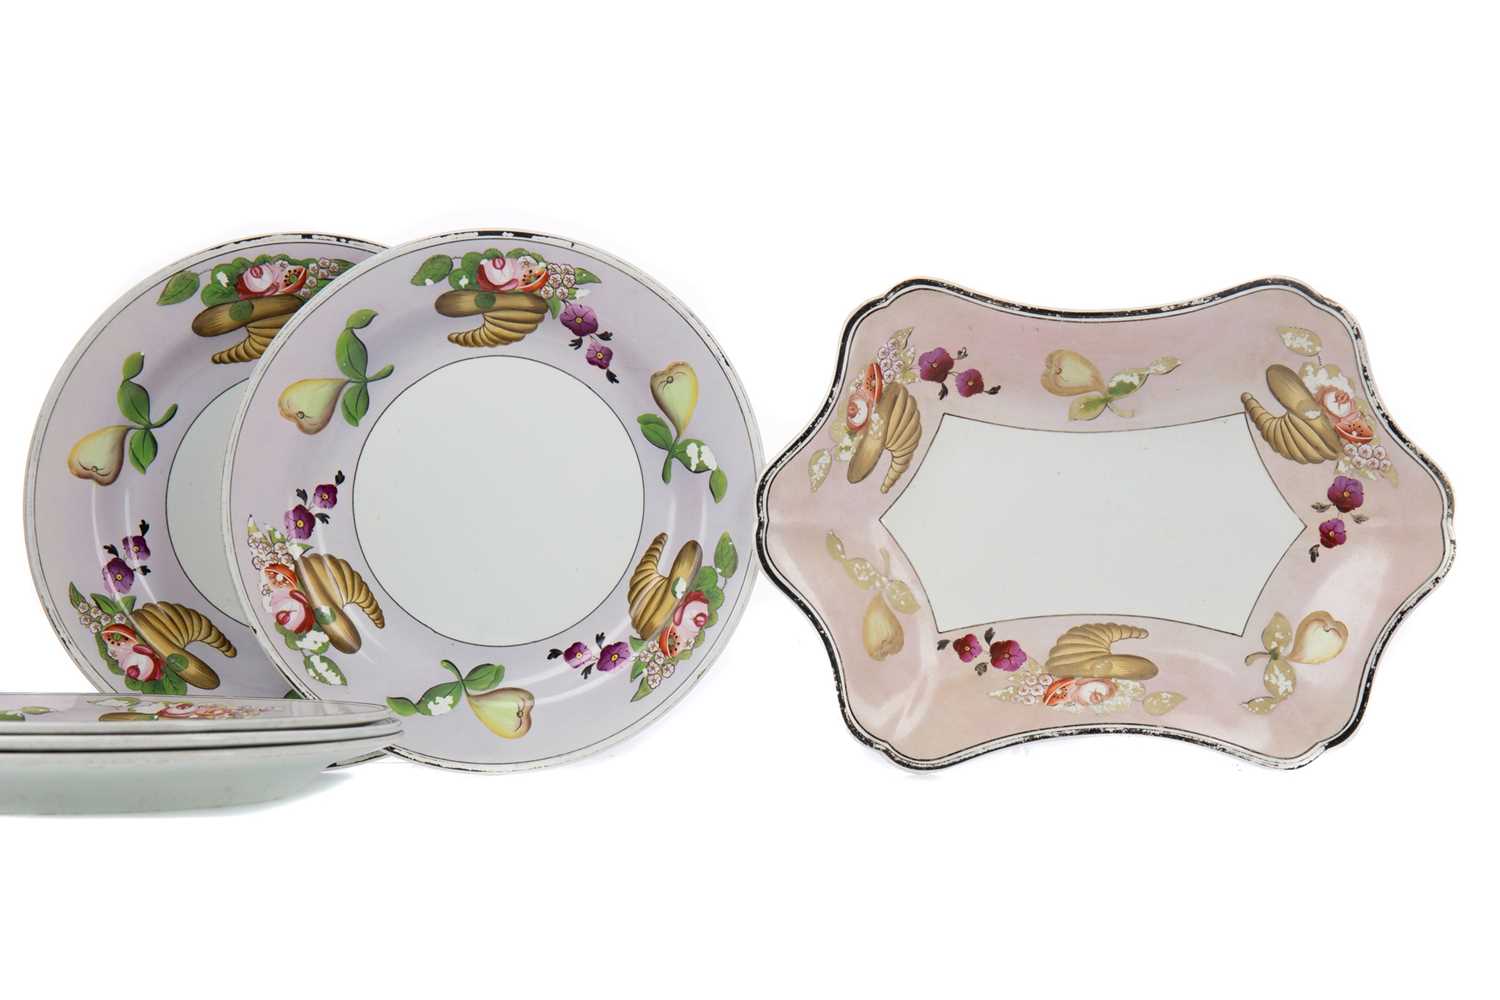 Lot 1117 - A SET OF FIVE WEDGWOOD CREAMWARE DESSERT PLATES, ALONG WITH A COMPORT